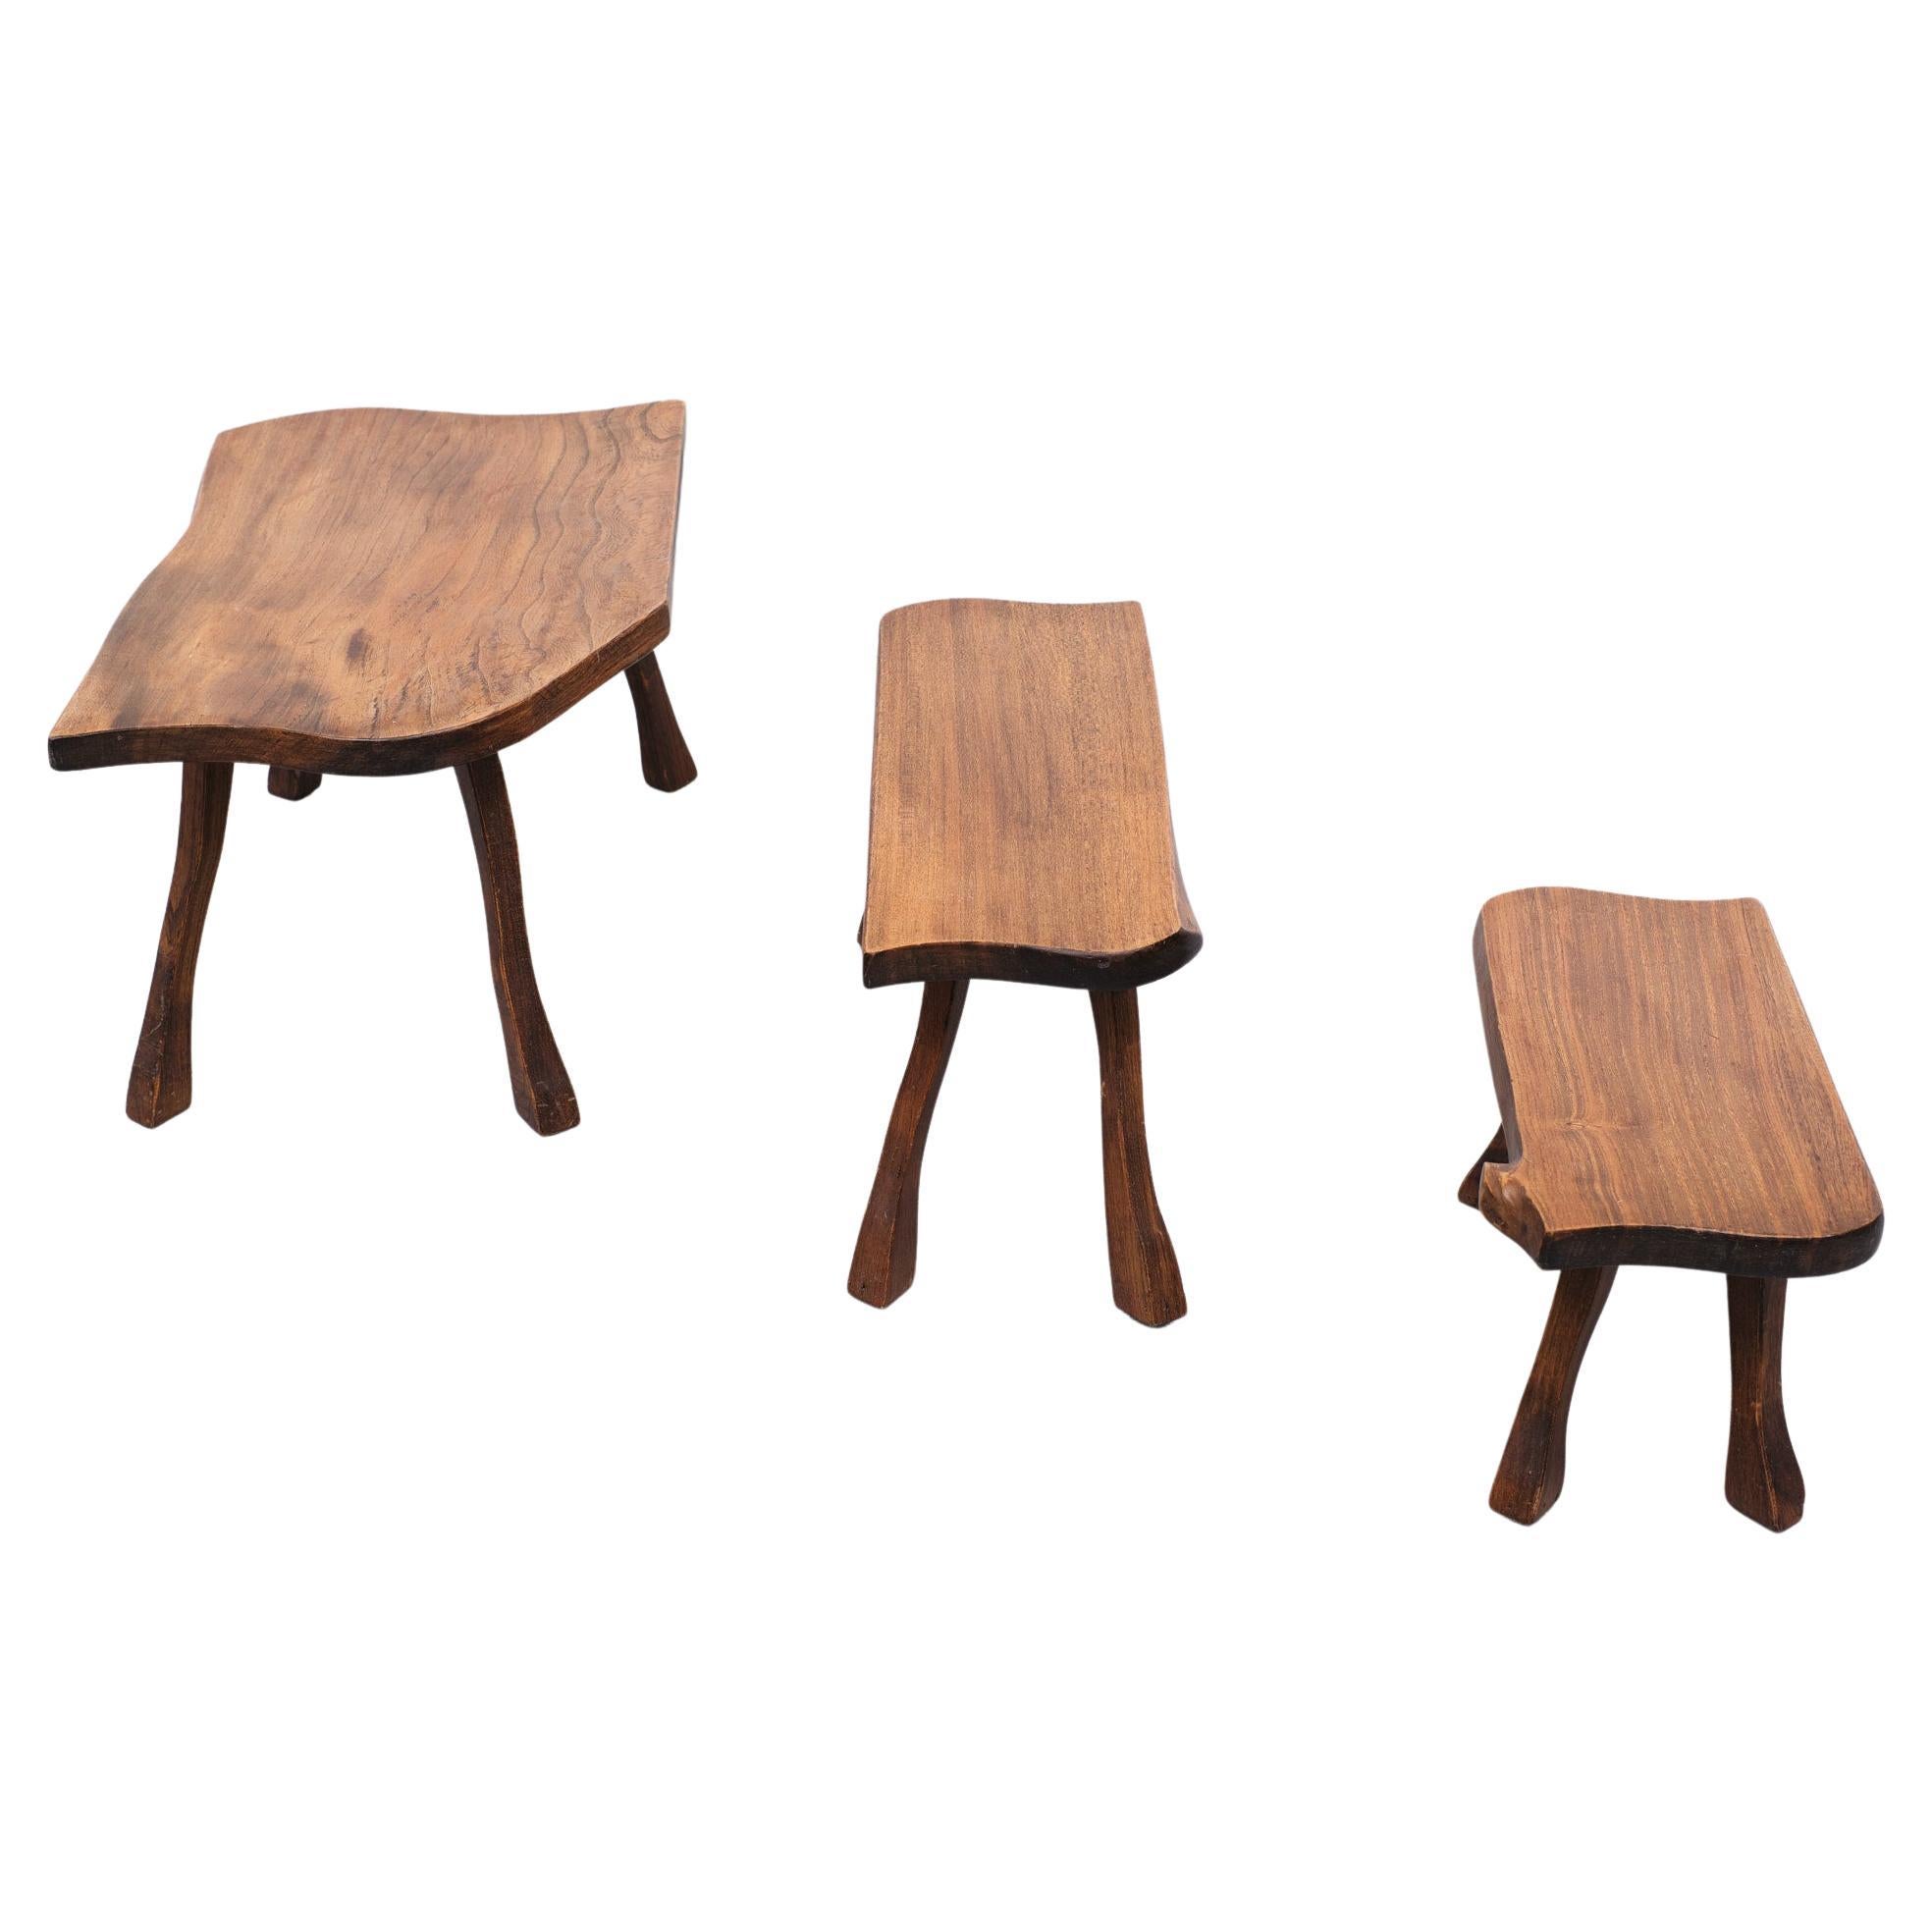 Tree Trunk Nesting Tables Hand Carved, 1960s In Good Condition For Sale In Den Haag, NL